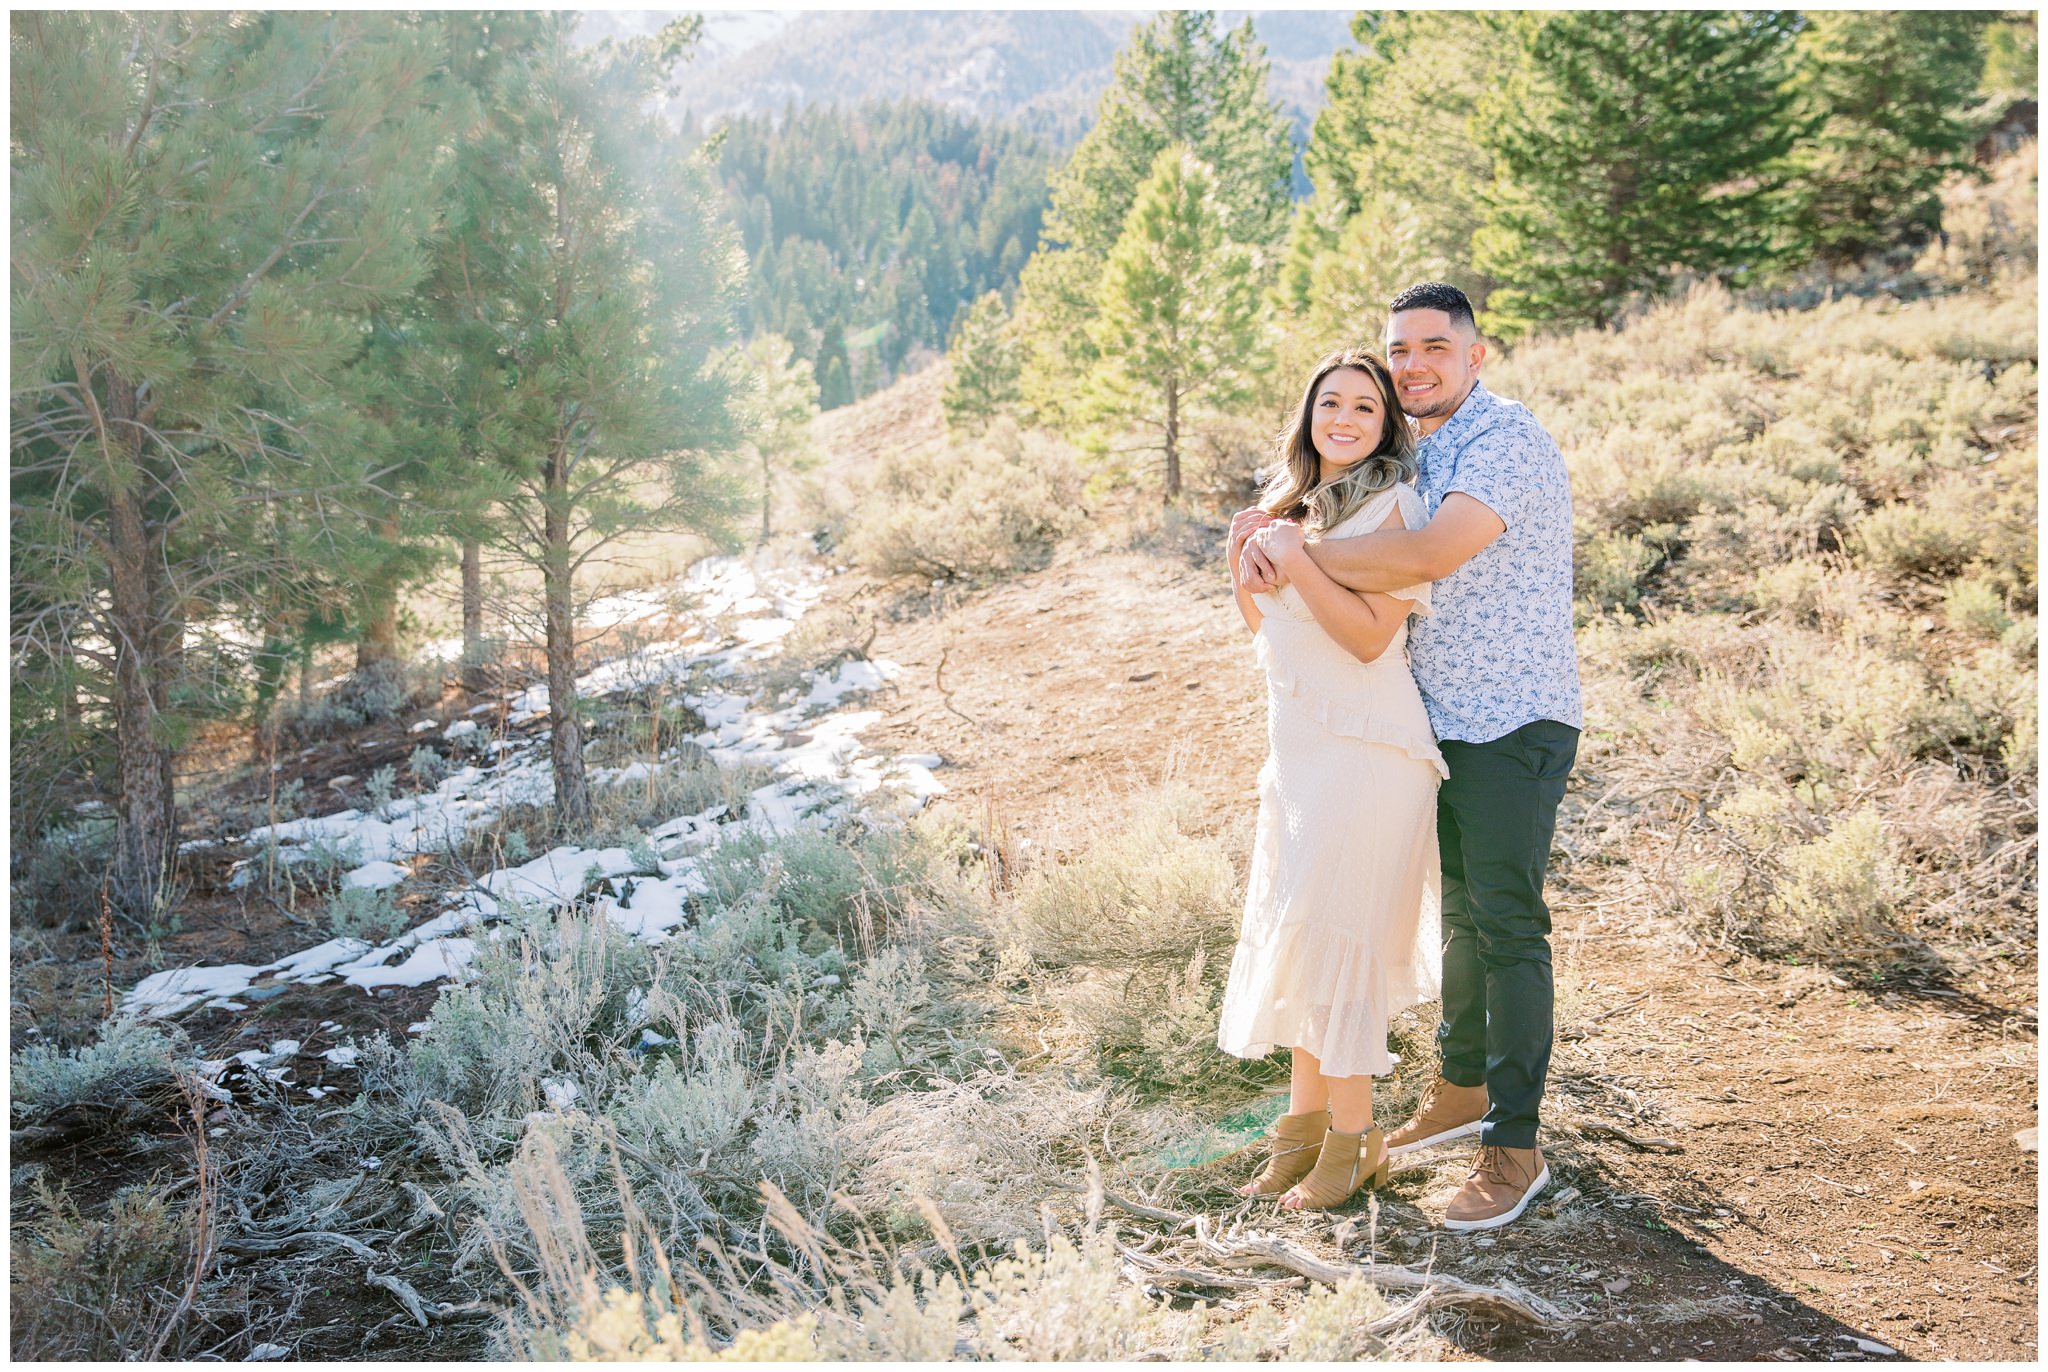 Mountainside engagement pictures at tibble fork reservoir in Utah up Provo Canyon